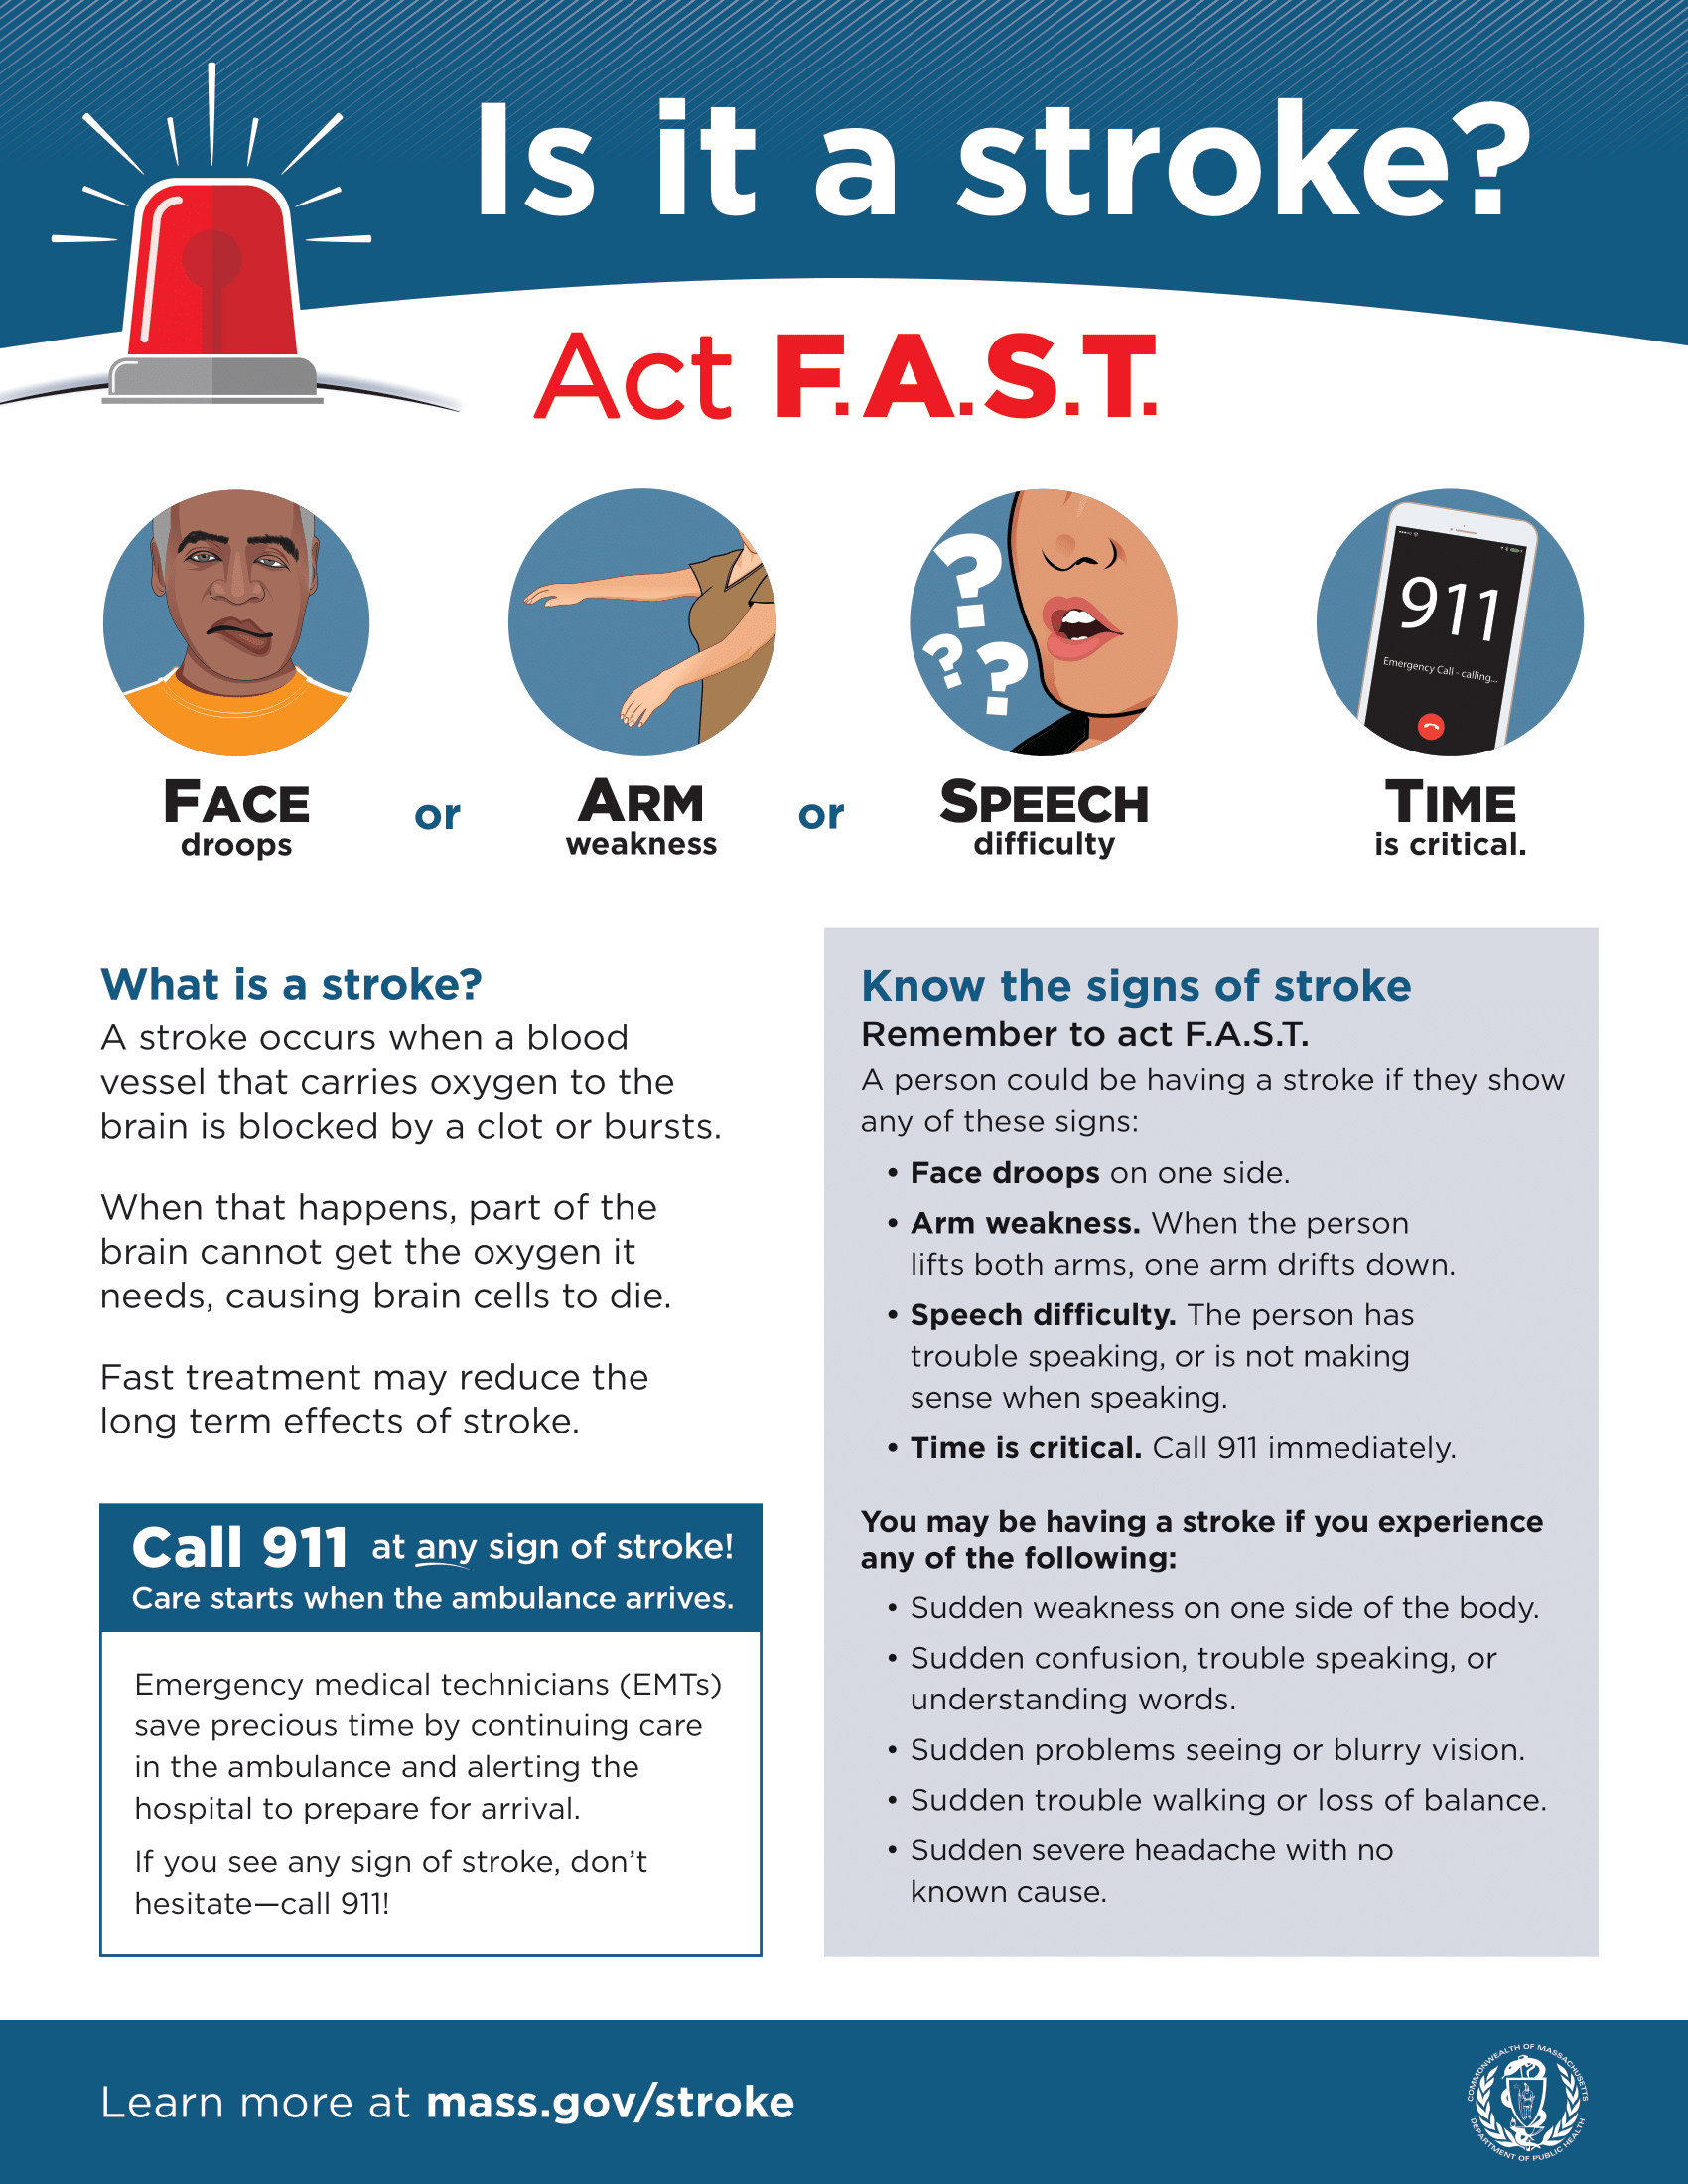 A white background with a sea blue trim at the top, the flyer says the following, “Is it a stroke? Act F.A.S.T. 911”. Below are image examples of what a stroke may look like and how to handle it quickly, “FACE droops, ARM weakness, SPEECH difficulty, TIME is critical.” The flyer continues, “What is a stroke? A stroke occurs when a blood vessel that carries oxygen to the brain is blocked by a clot or bursts. When that happens, part of the brain cannot get the oxygen it needs, causing brain cells to die. Fast treatment may reduce the long term effects of stroke. Call 911 at any sign of stroke! Care starts when the ambulance arrives. Emergency medical technicians (EMTs) save precious time by continuing care in the ambulance and alerting the hospital to prepare for arrival. If you see any sign of stroke, don't hesitate-call 911!” More information says, “Know the signs of stroke Remember to act F.A.S.T. A person could be having a stroke if they show any of these signs: • Face droops on one side. • Arm weakness. When the person lifts both arms, one arm drifts down. • Speech difficulty. The person has trouble speaking, or is not making sense when speaking. • Time is critical. Call 911 immediately. You may be having a stroke if you experience any of the following: • Sudden weakness on one side of the body. • Sudden confusion, trouble speaking, or understanding words. • Sudden problems seeing or blurry vision. • Sudden trouble walking or loss of balance. • Sudden severe headache with no known cause.” Learn more at mass.gov/stroke